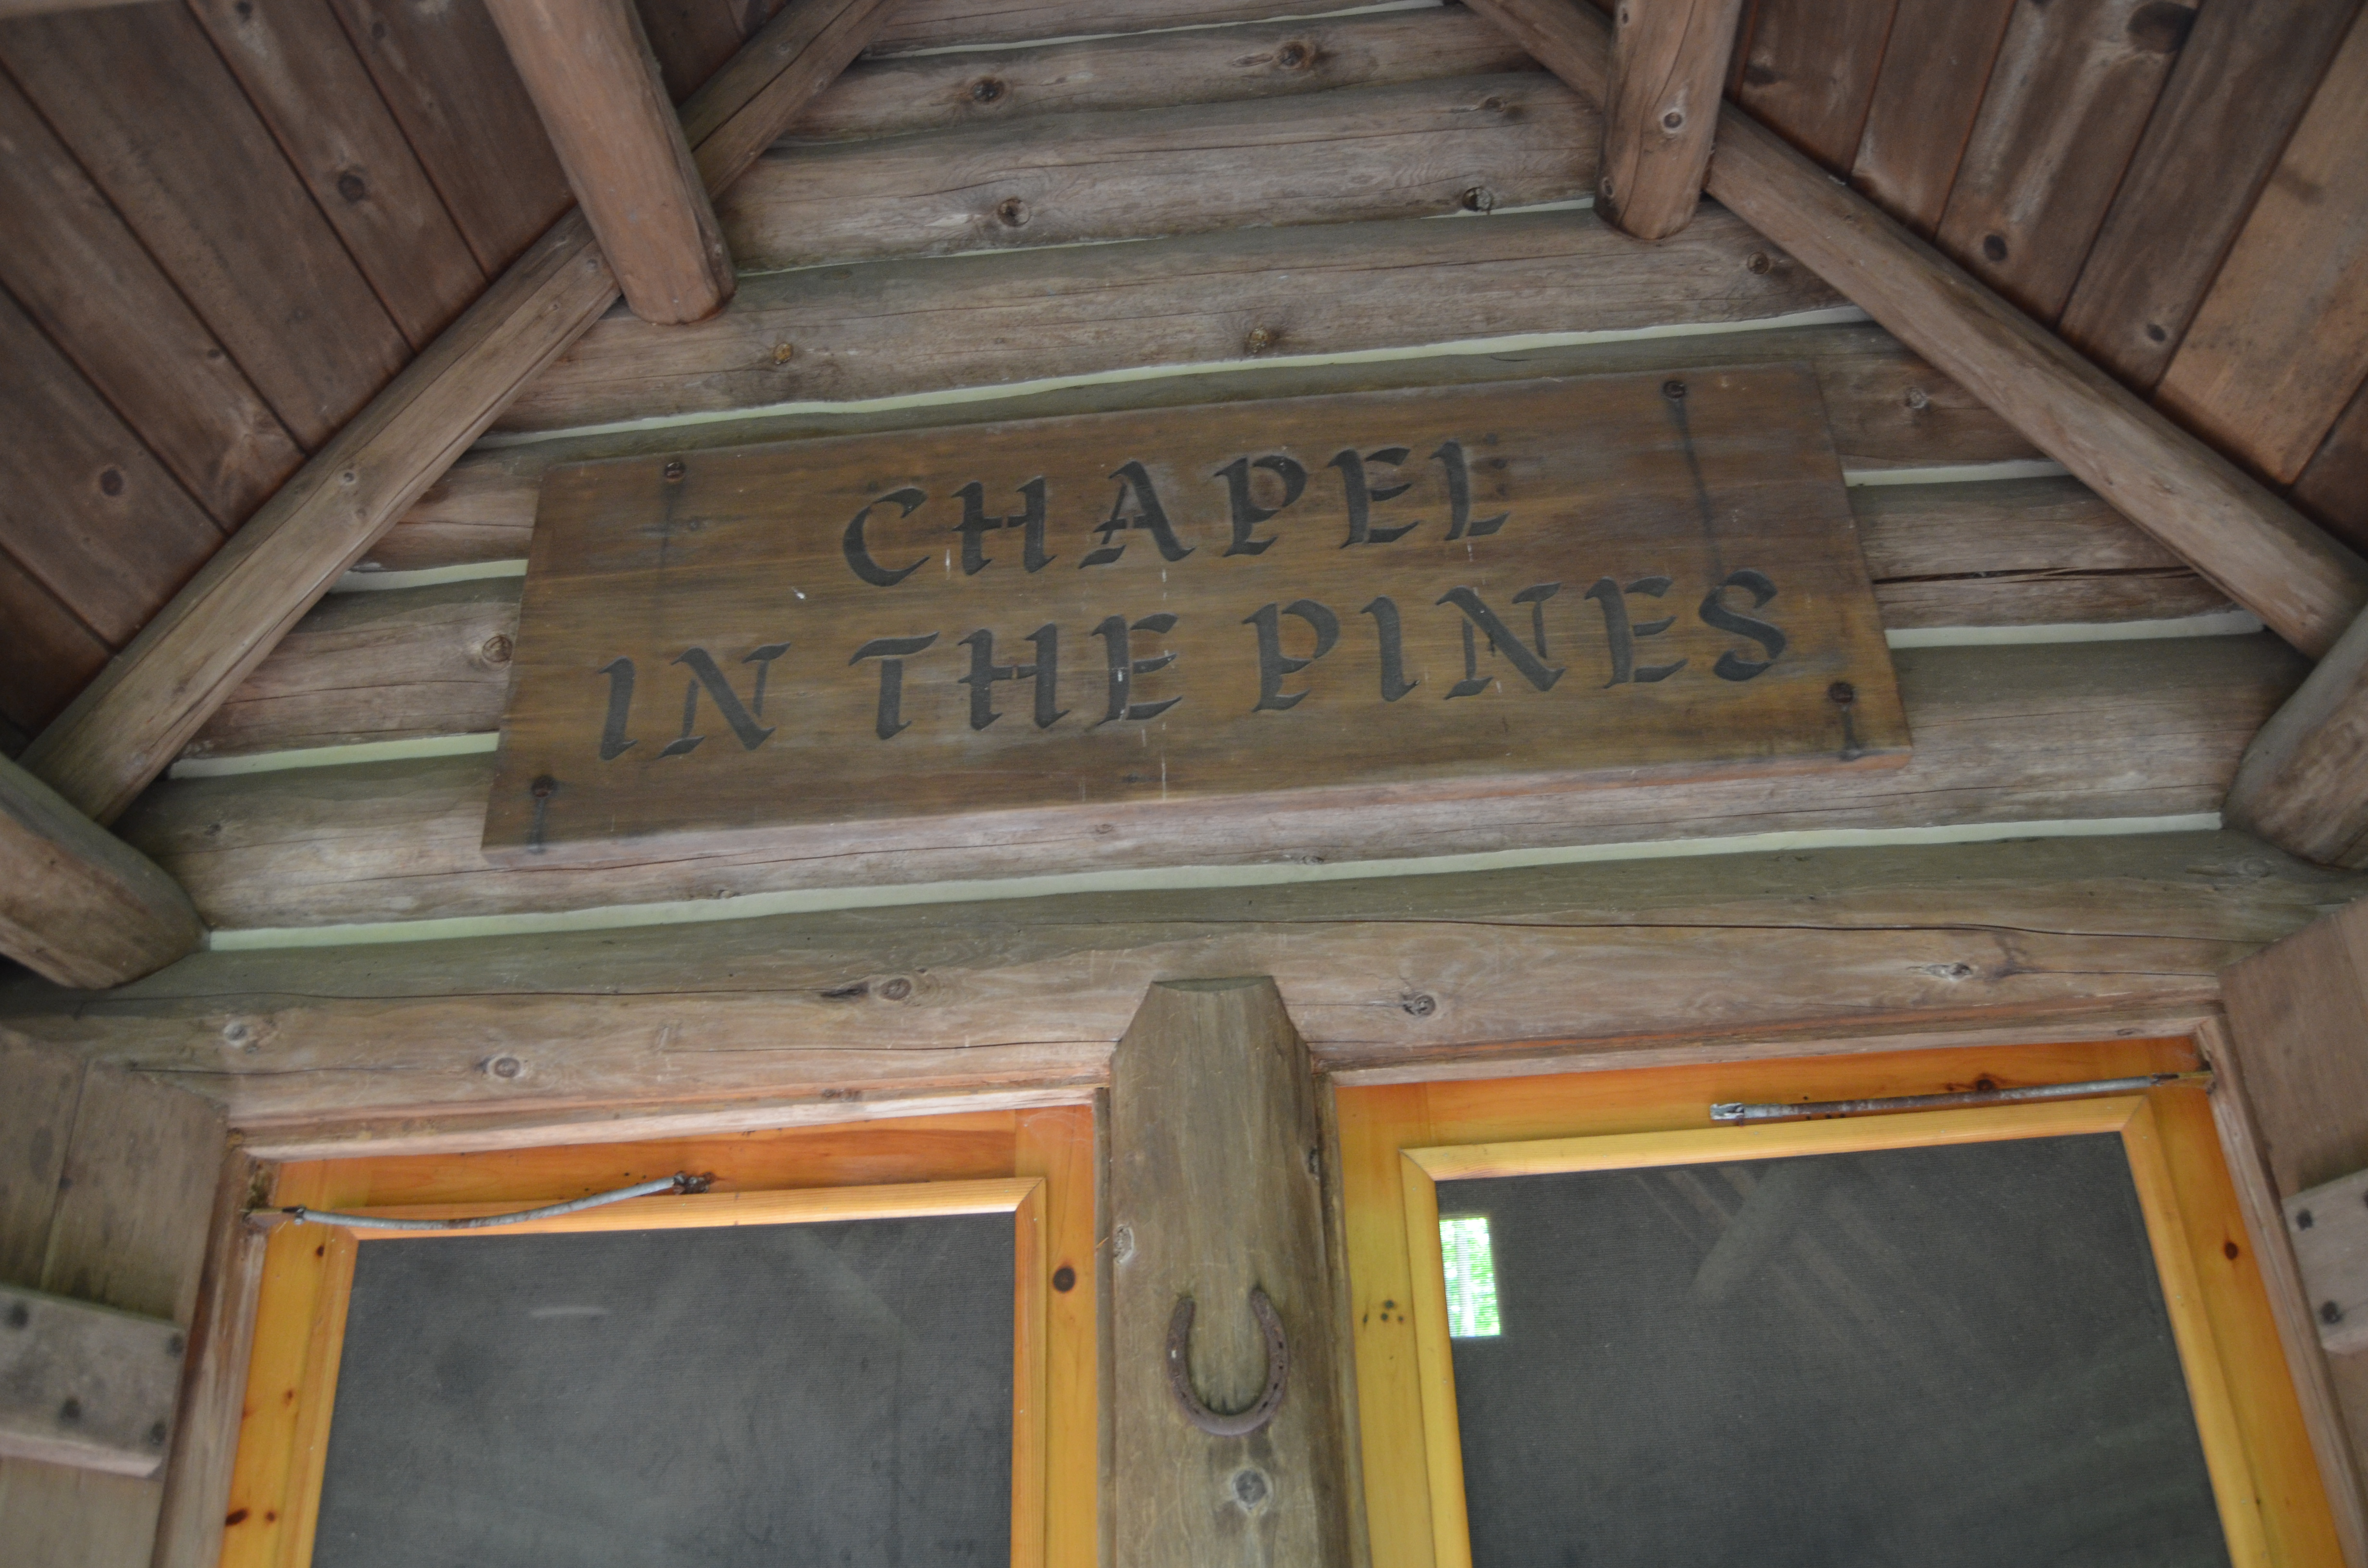 Hartwick Pines State Park Chapel in the Pines Entrance